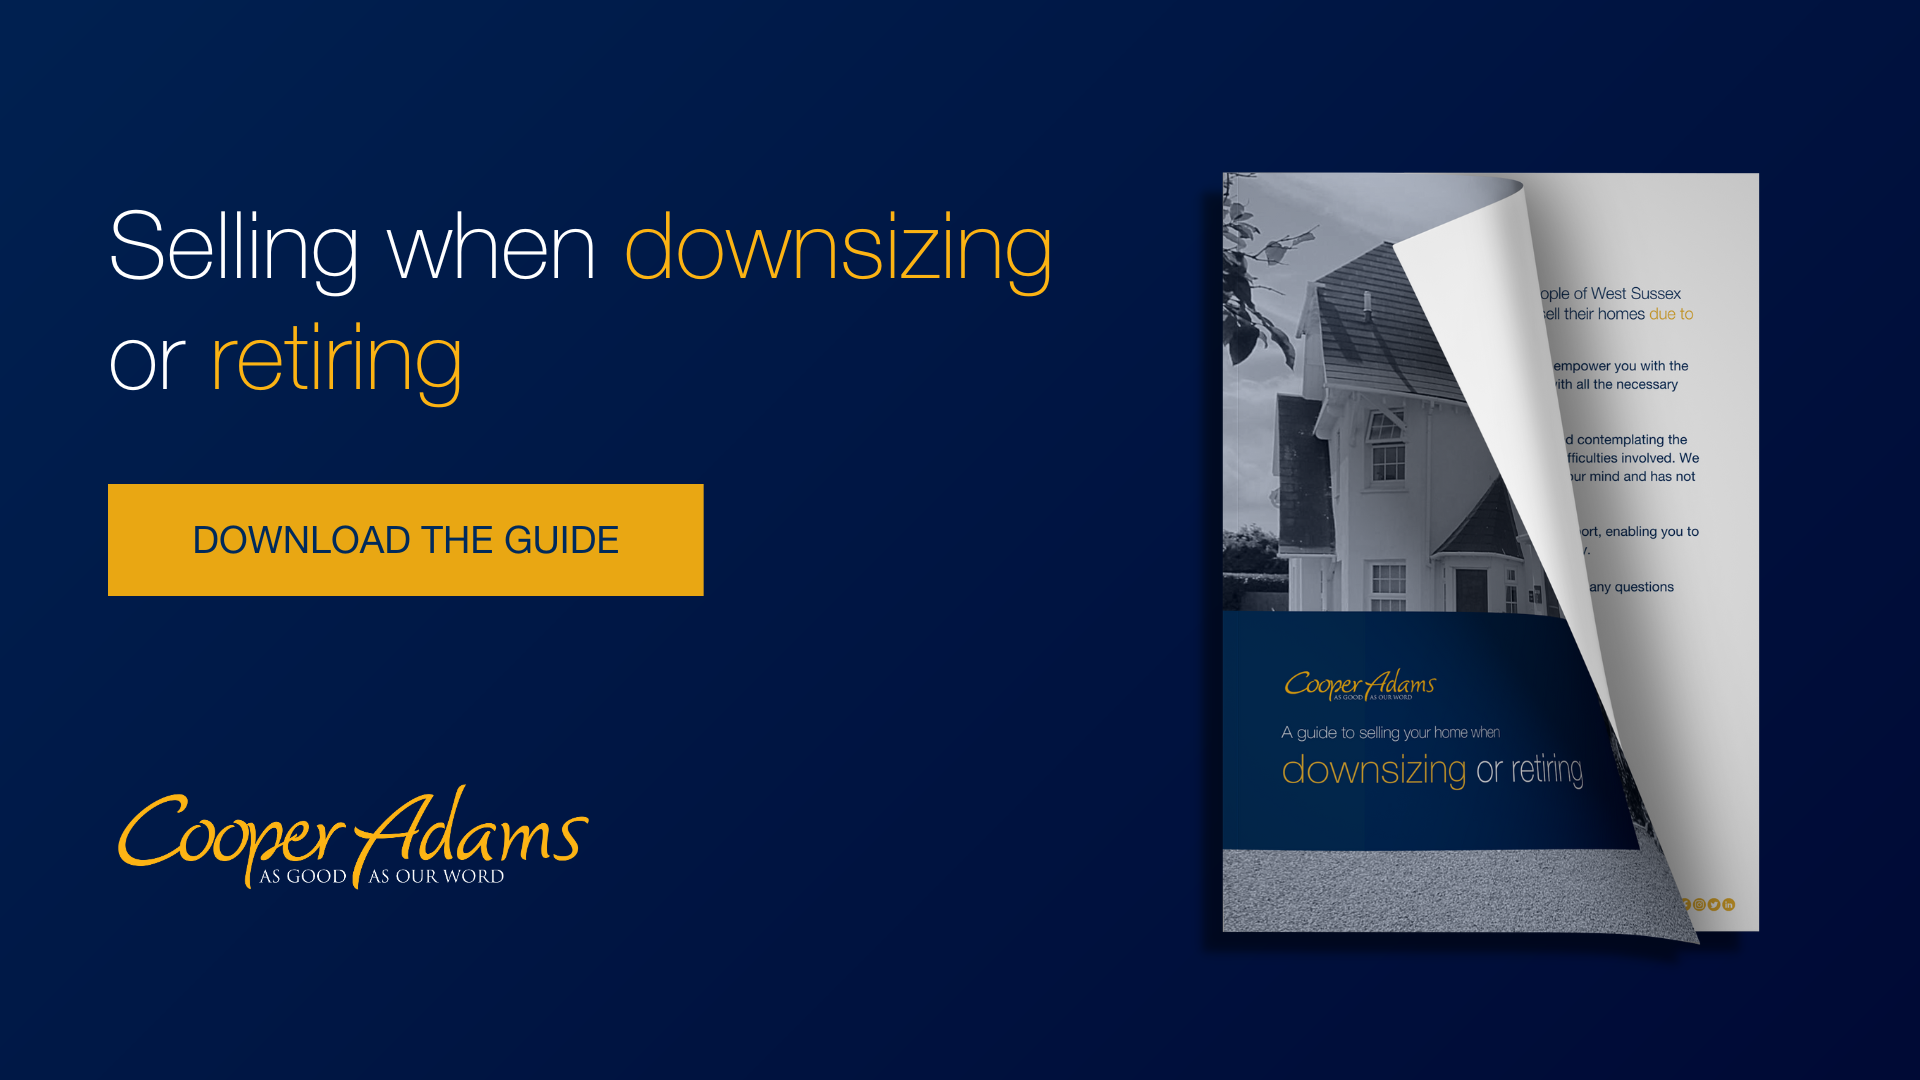 Download our guide to selling due to downsizing or retiring